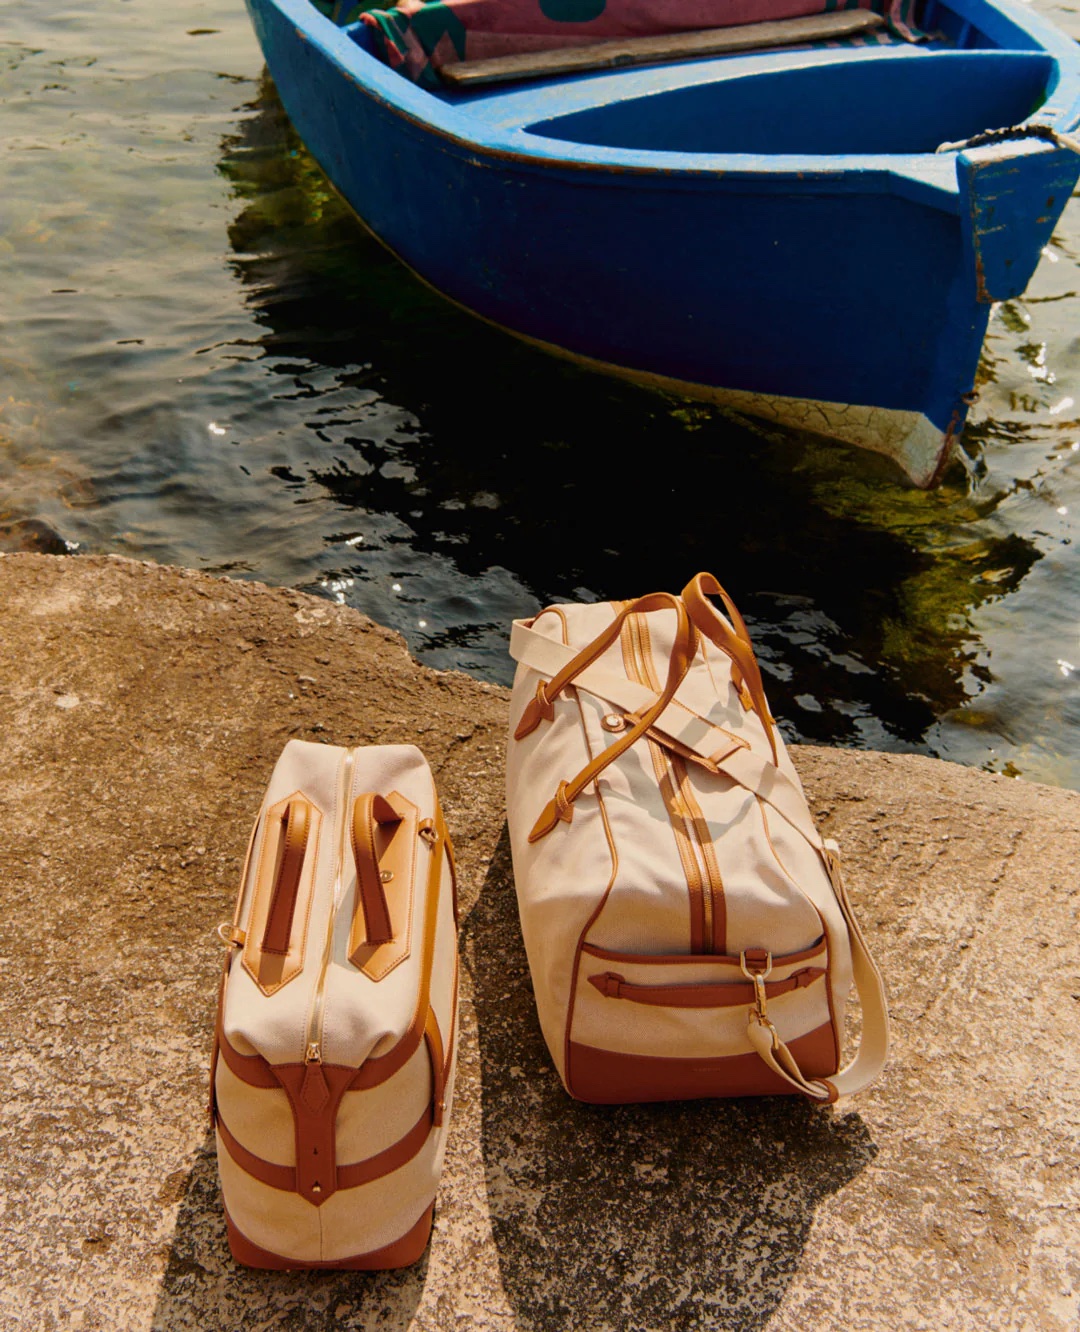 Two canvas bags sit on a stone dock next to a boat.